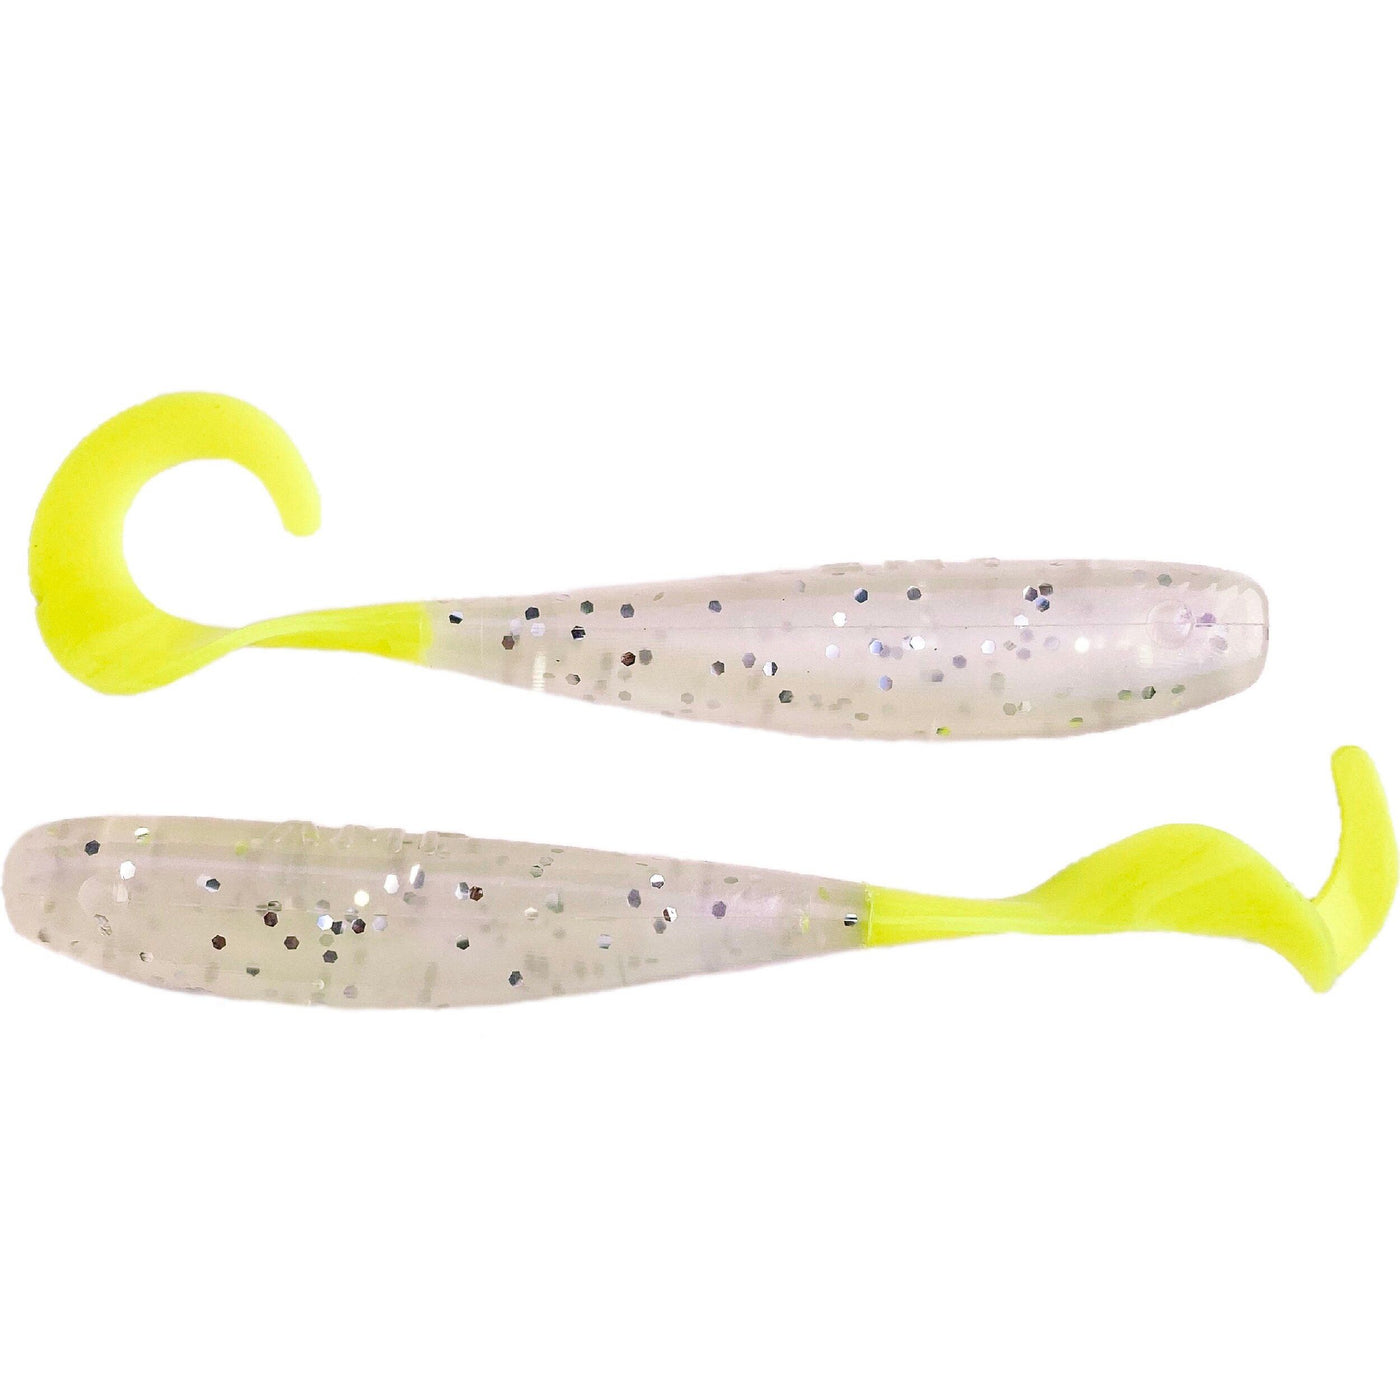 A.M. Fishing - Garlic Infused Soft Plastics A.M. Fishing 4in - 8pk Pearltreuse 